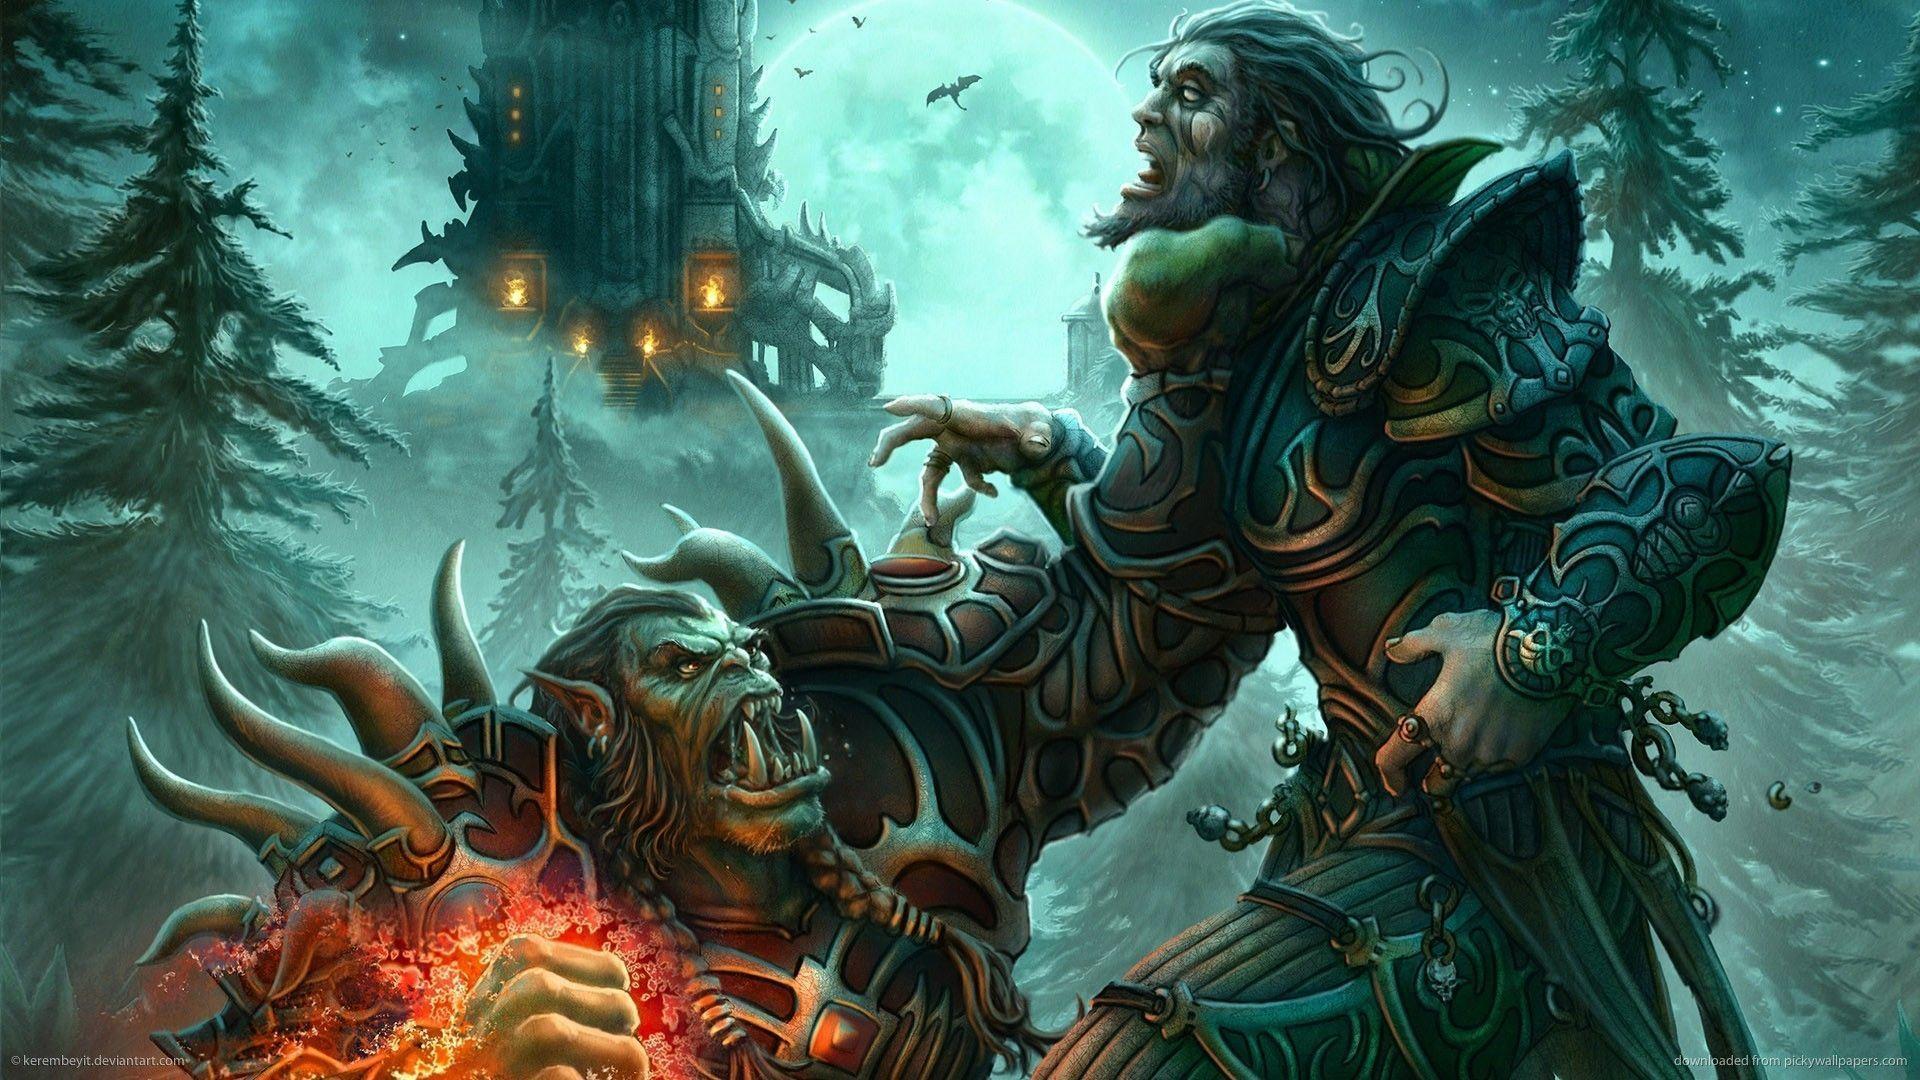 Orc Warlock Picture For iPhone, Blackberry, iPad, Orc Warlock